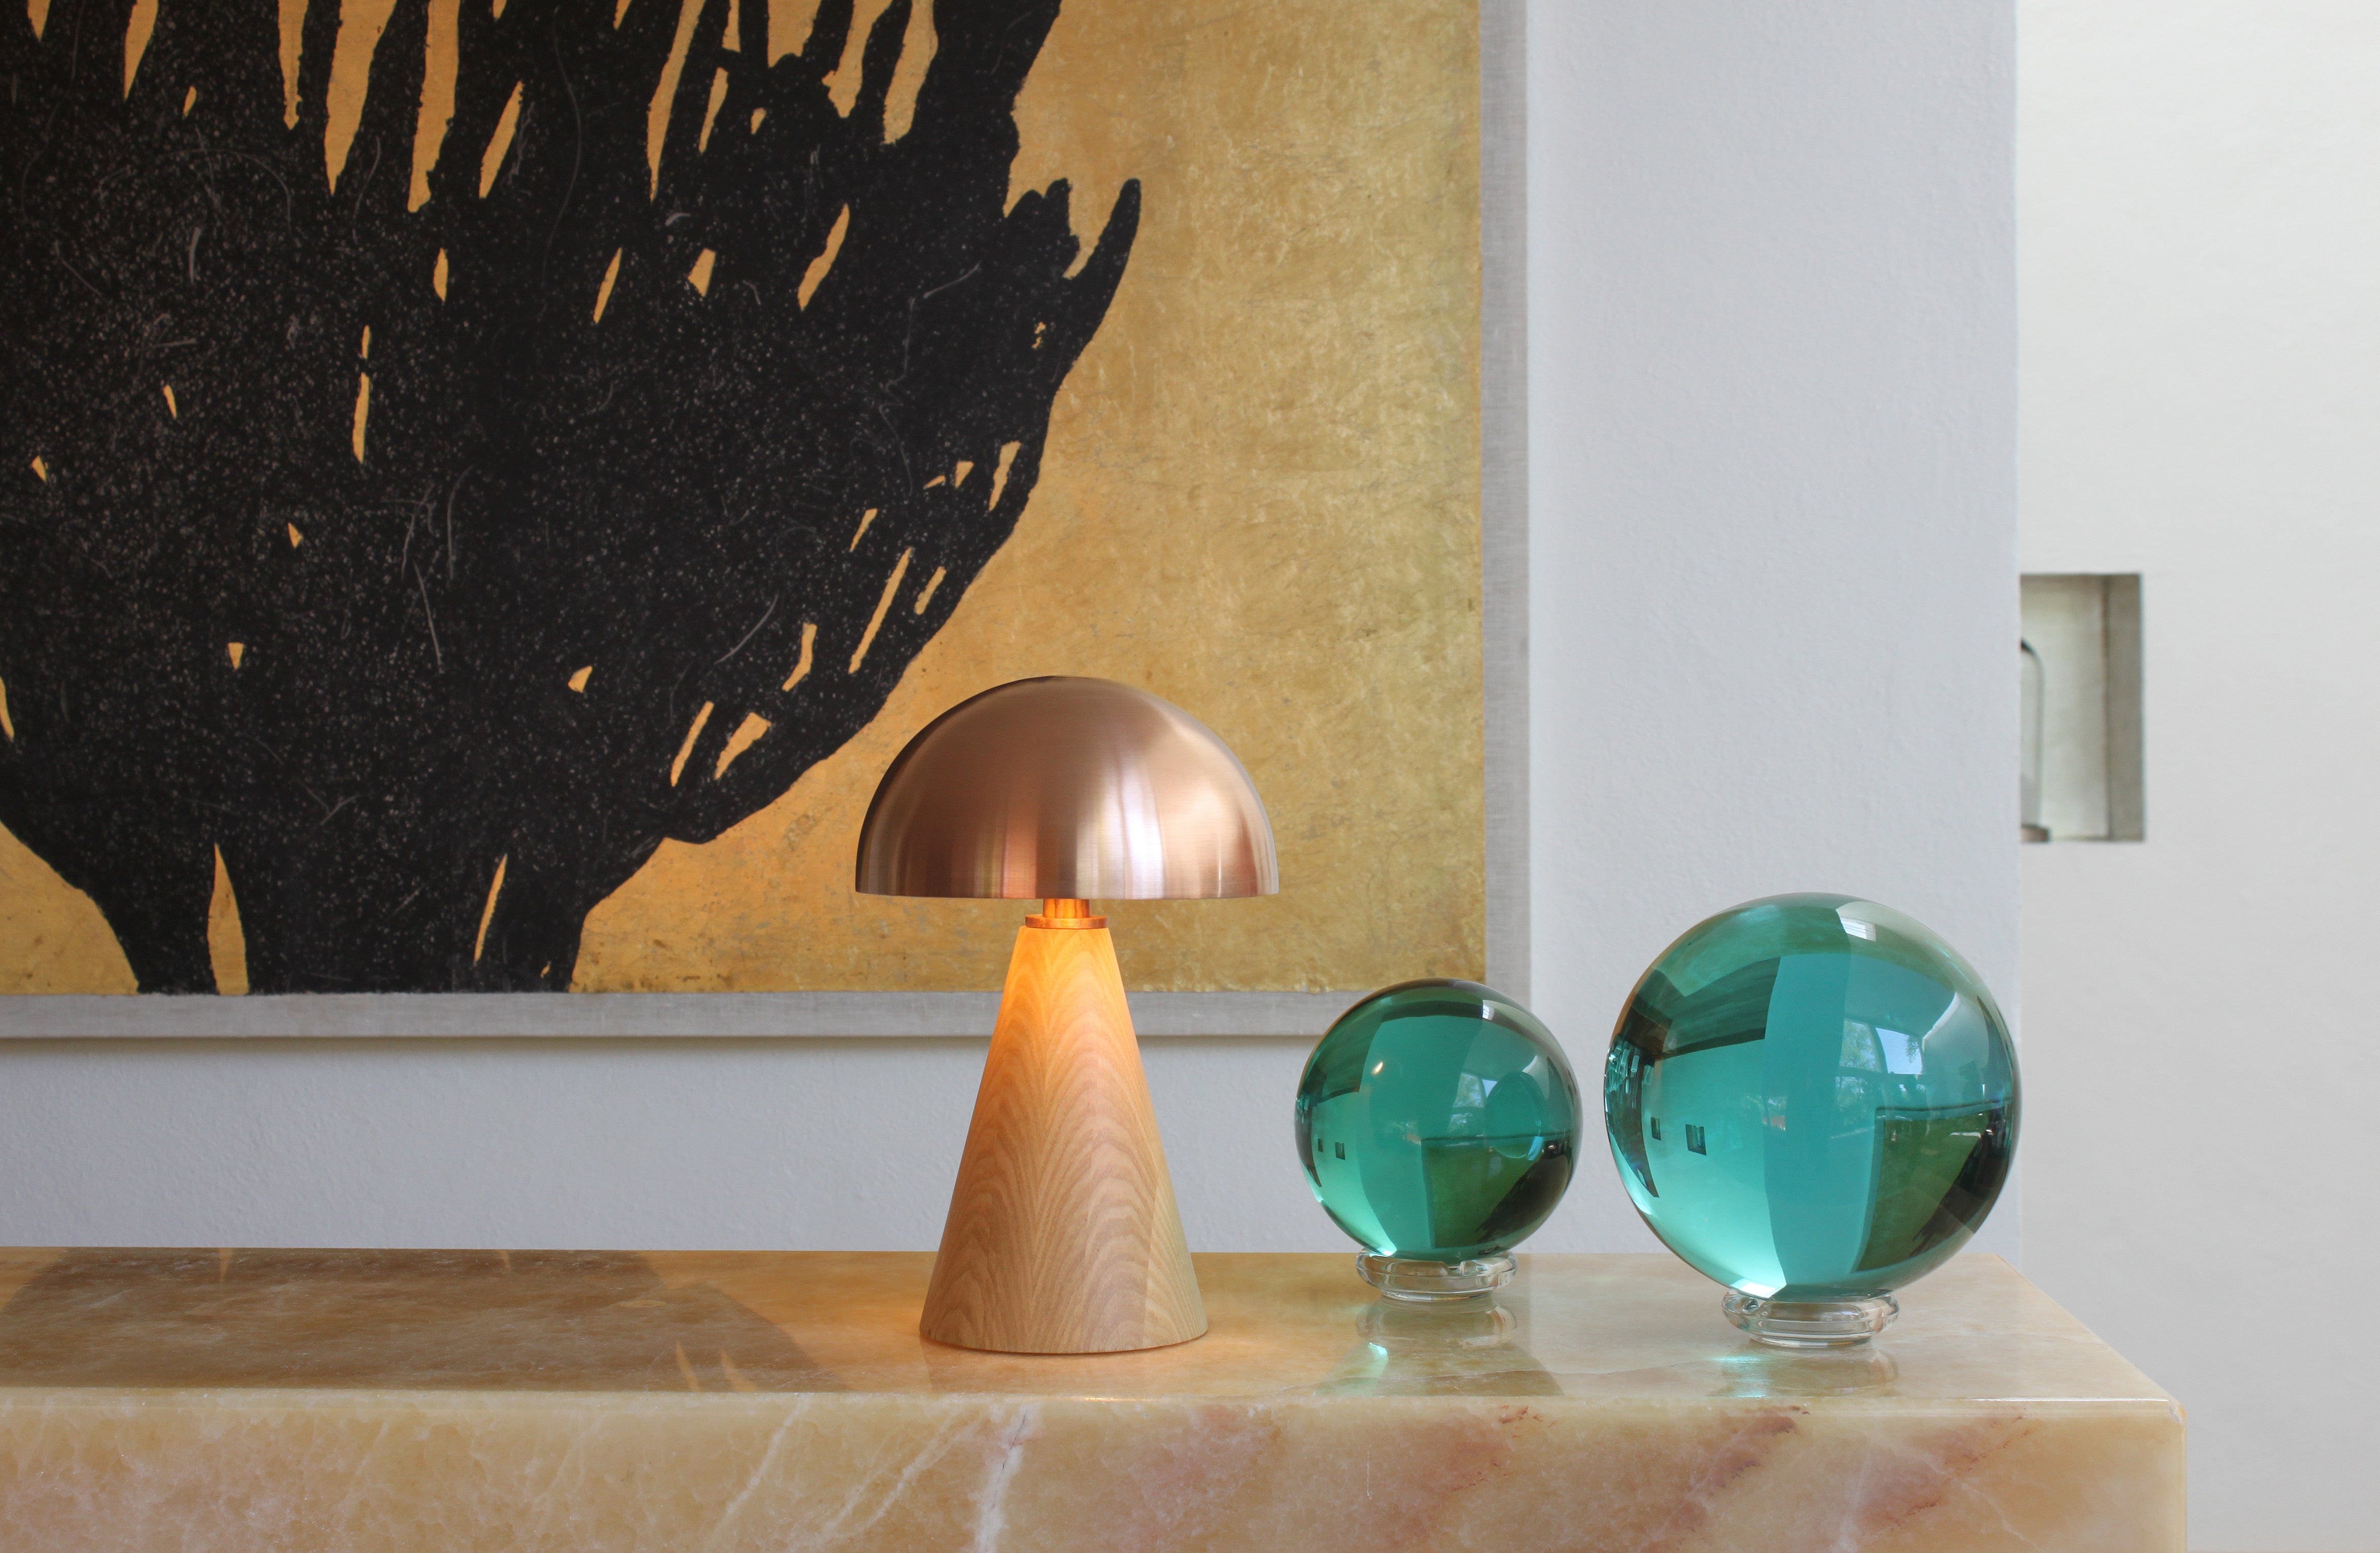 Paraguas Lamp is a table lamp by Maria Beckmann available through Tuleste Factory.